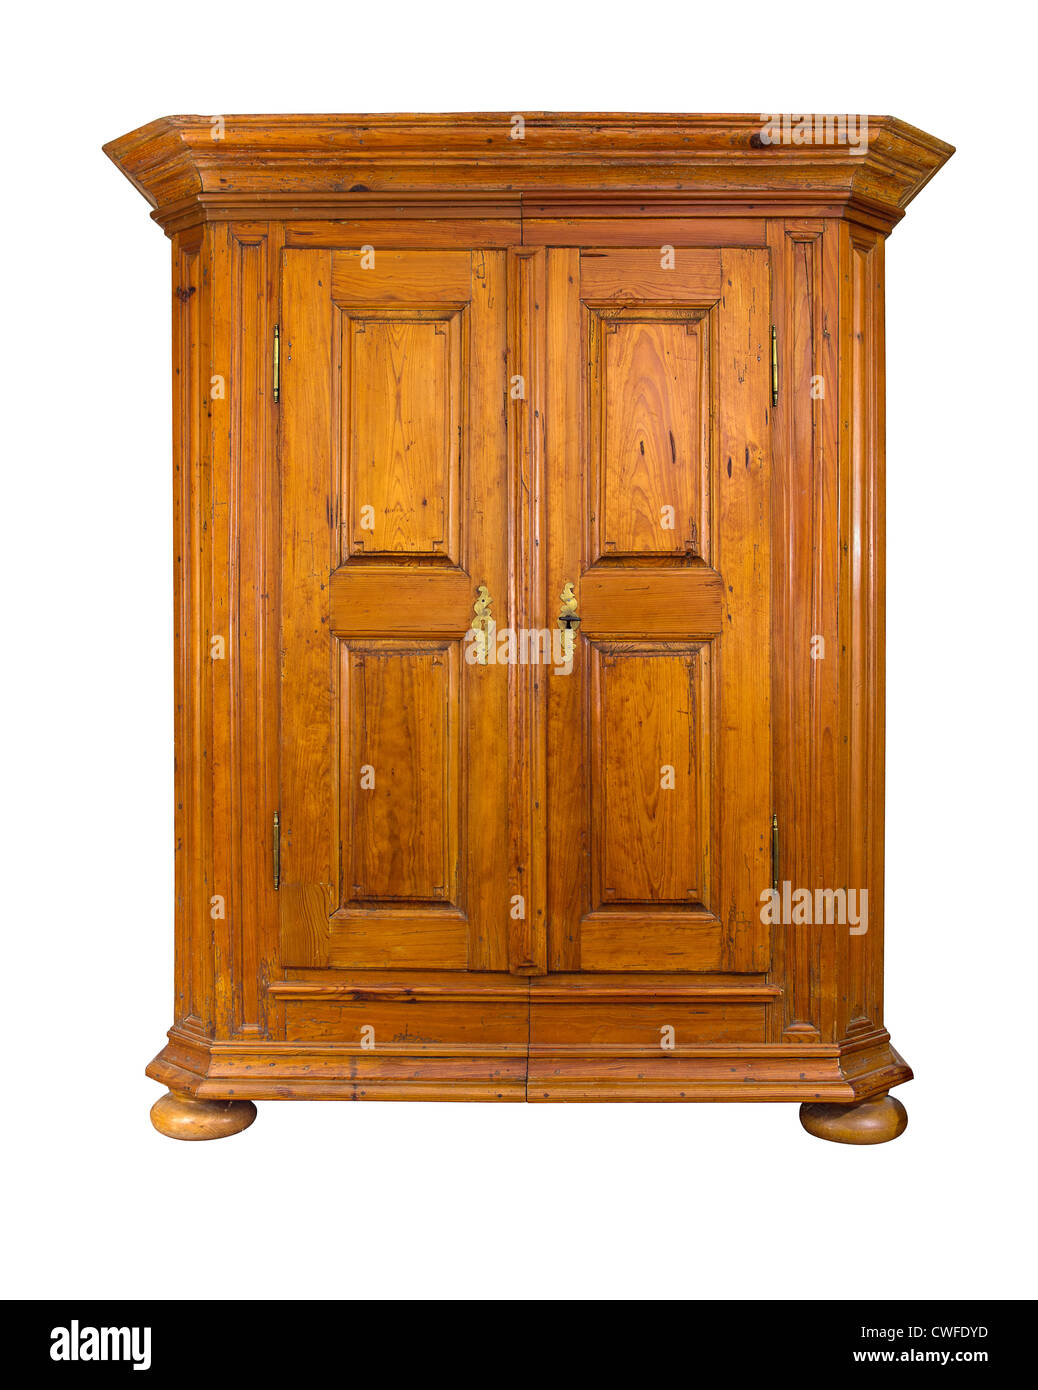 baroque wooden cabinet Stock Photo